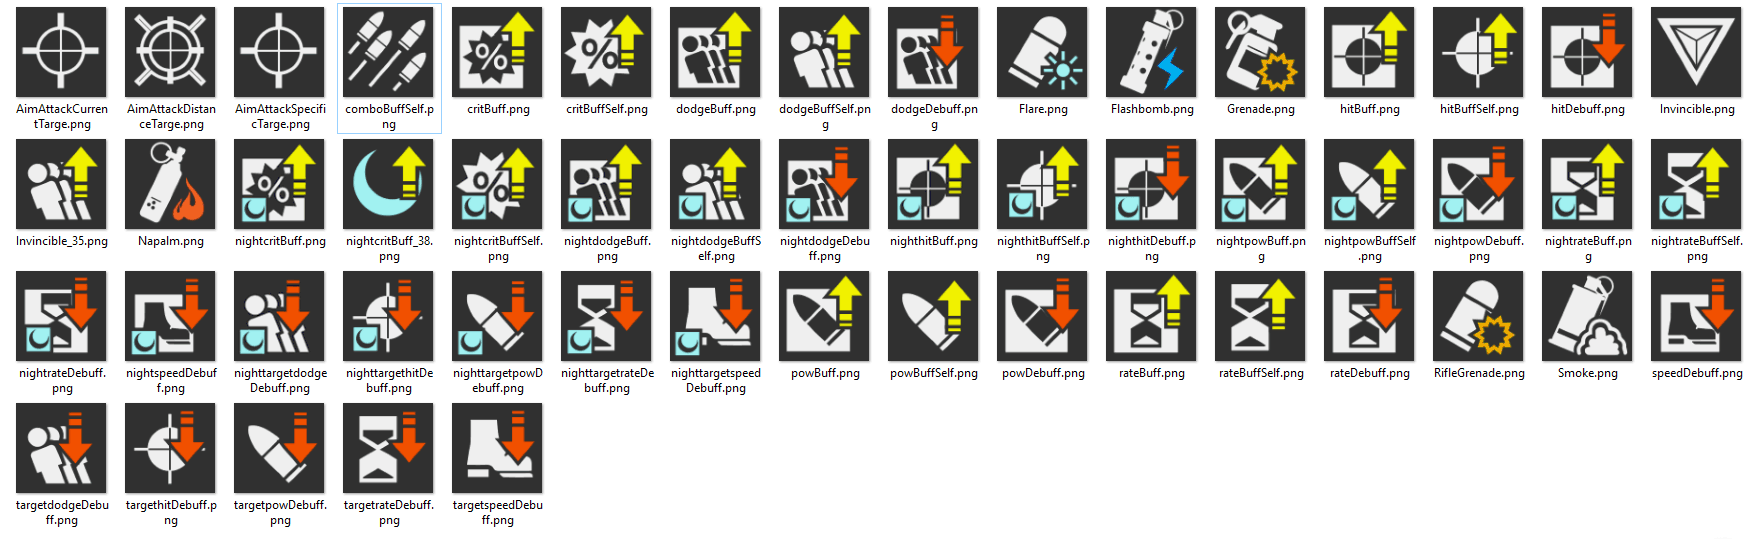 skill icon list.png